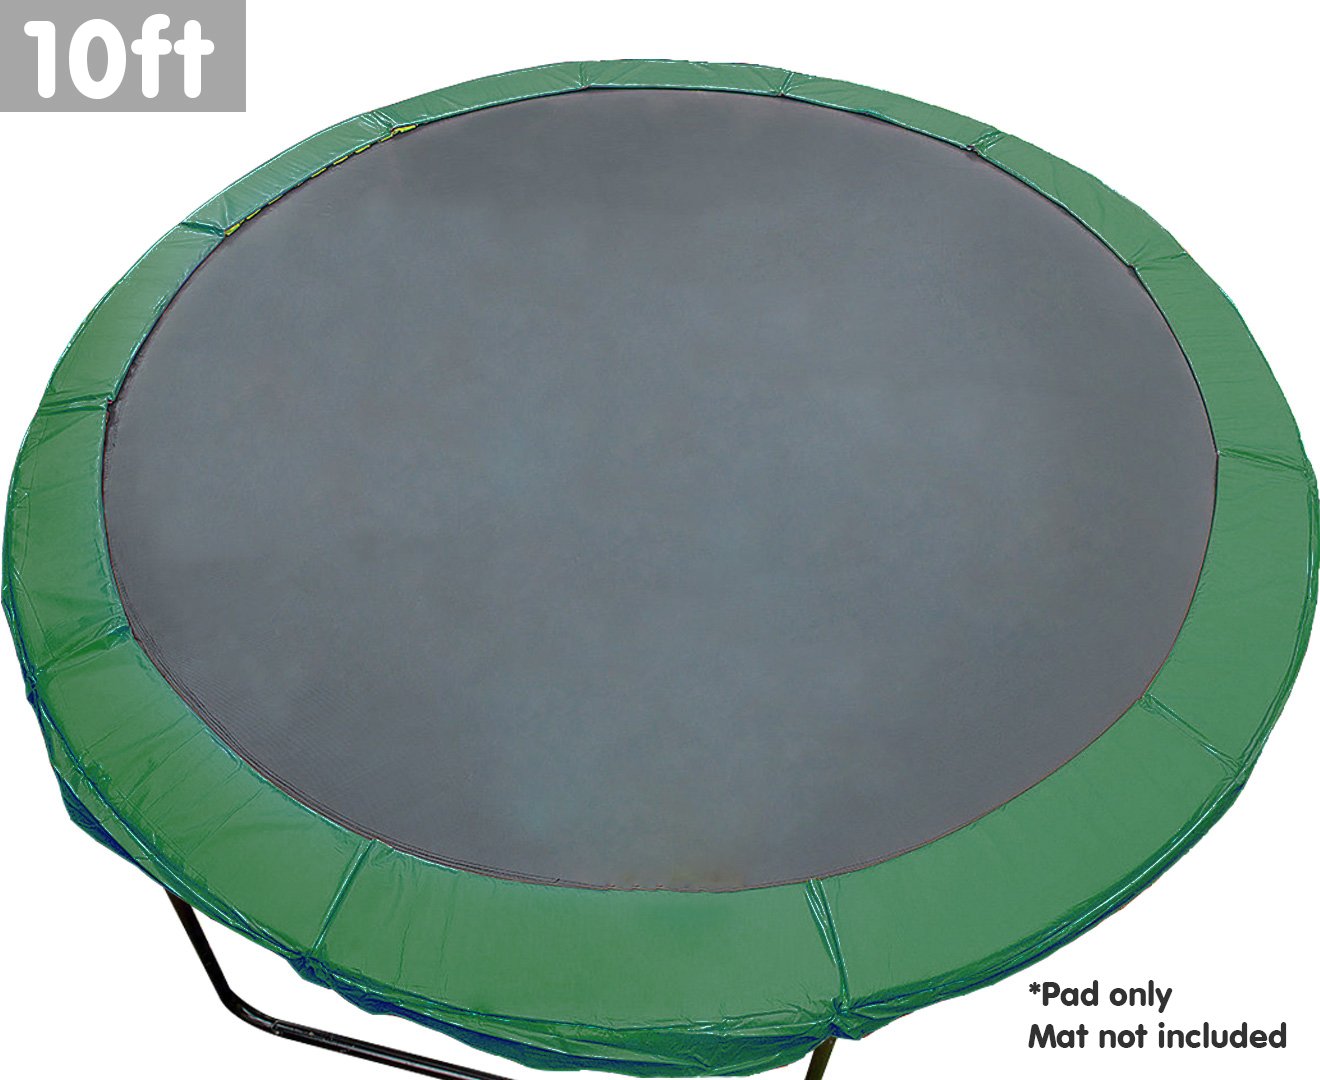 Trampoline 10ft Replacement Pad Outdoor Round Spring Cover Green 1